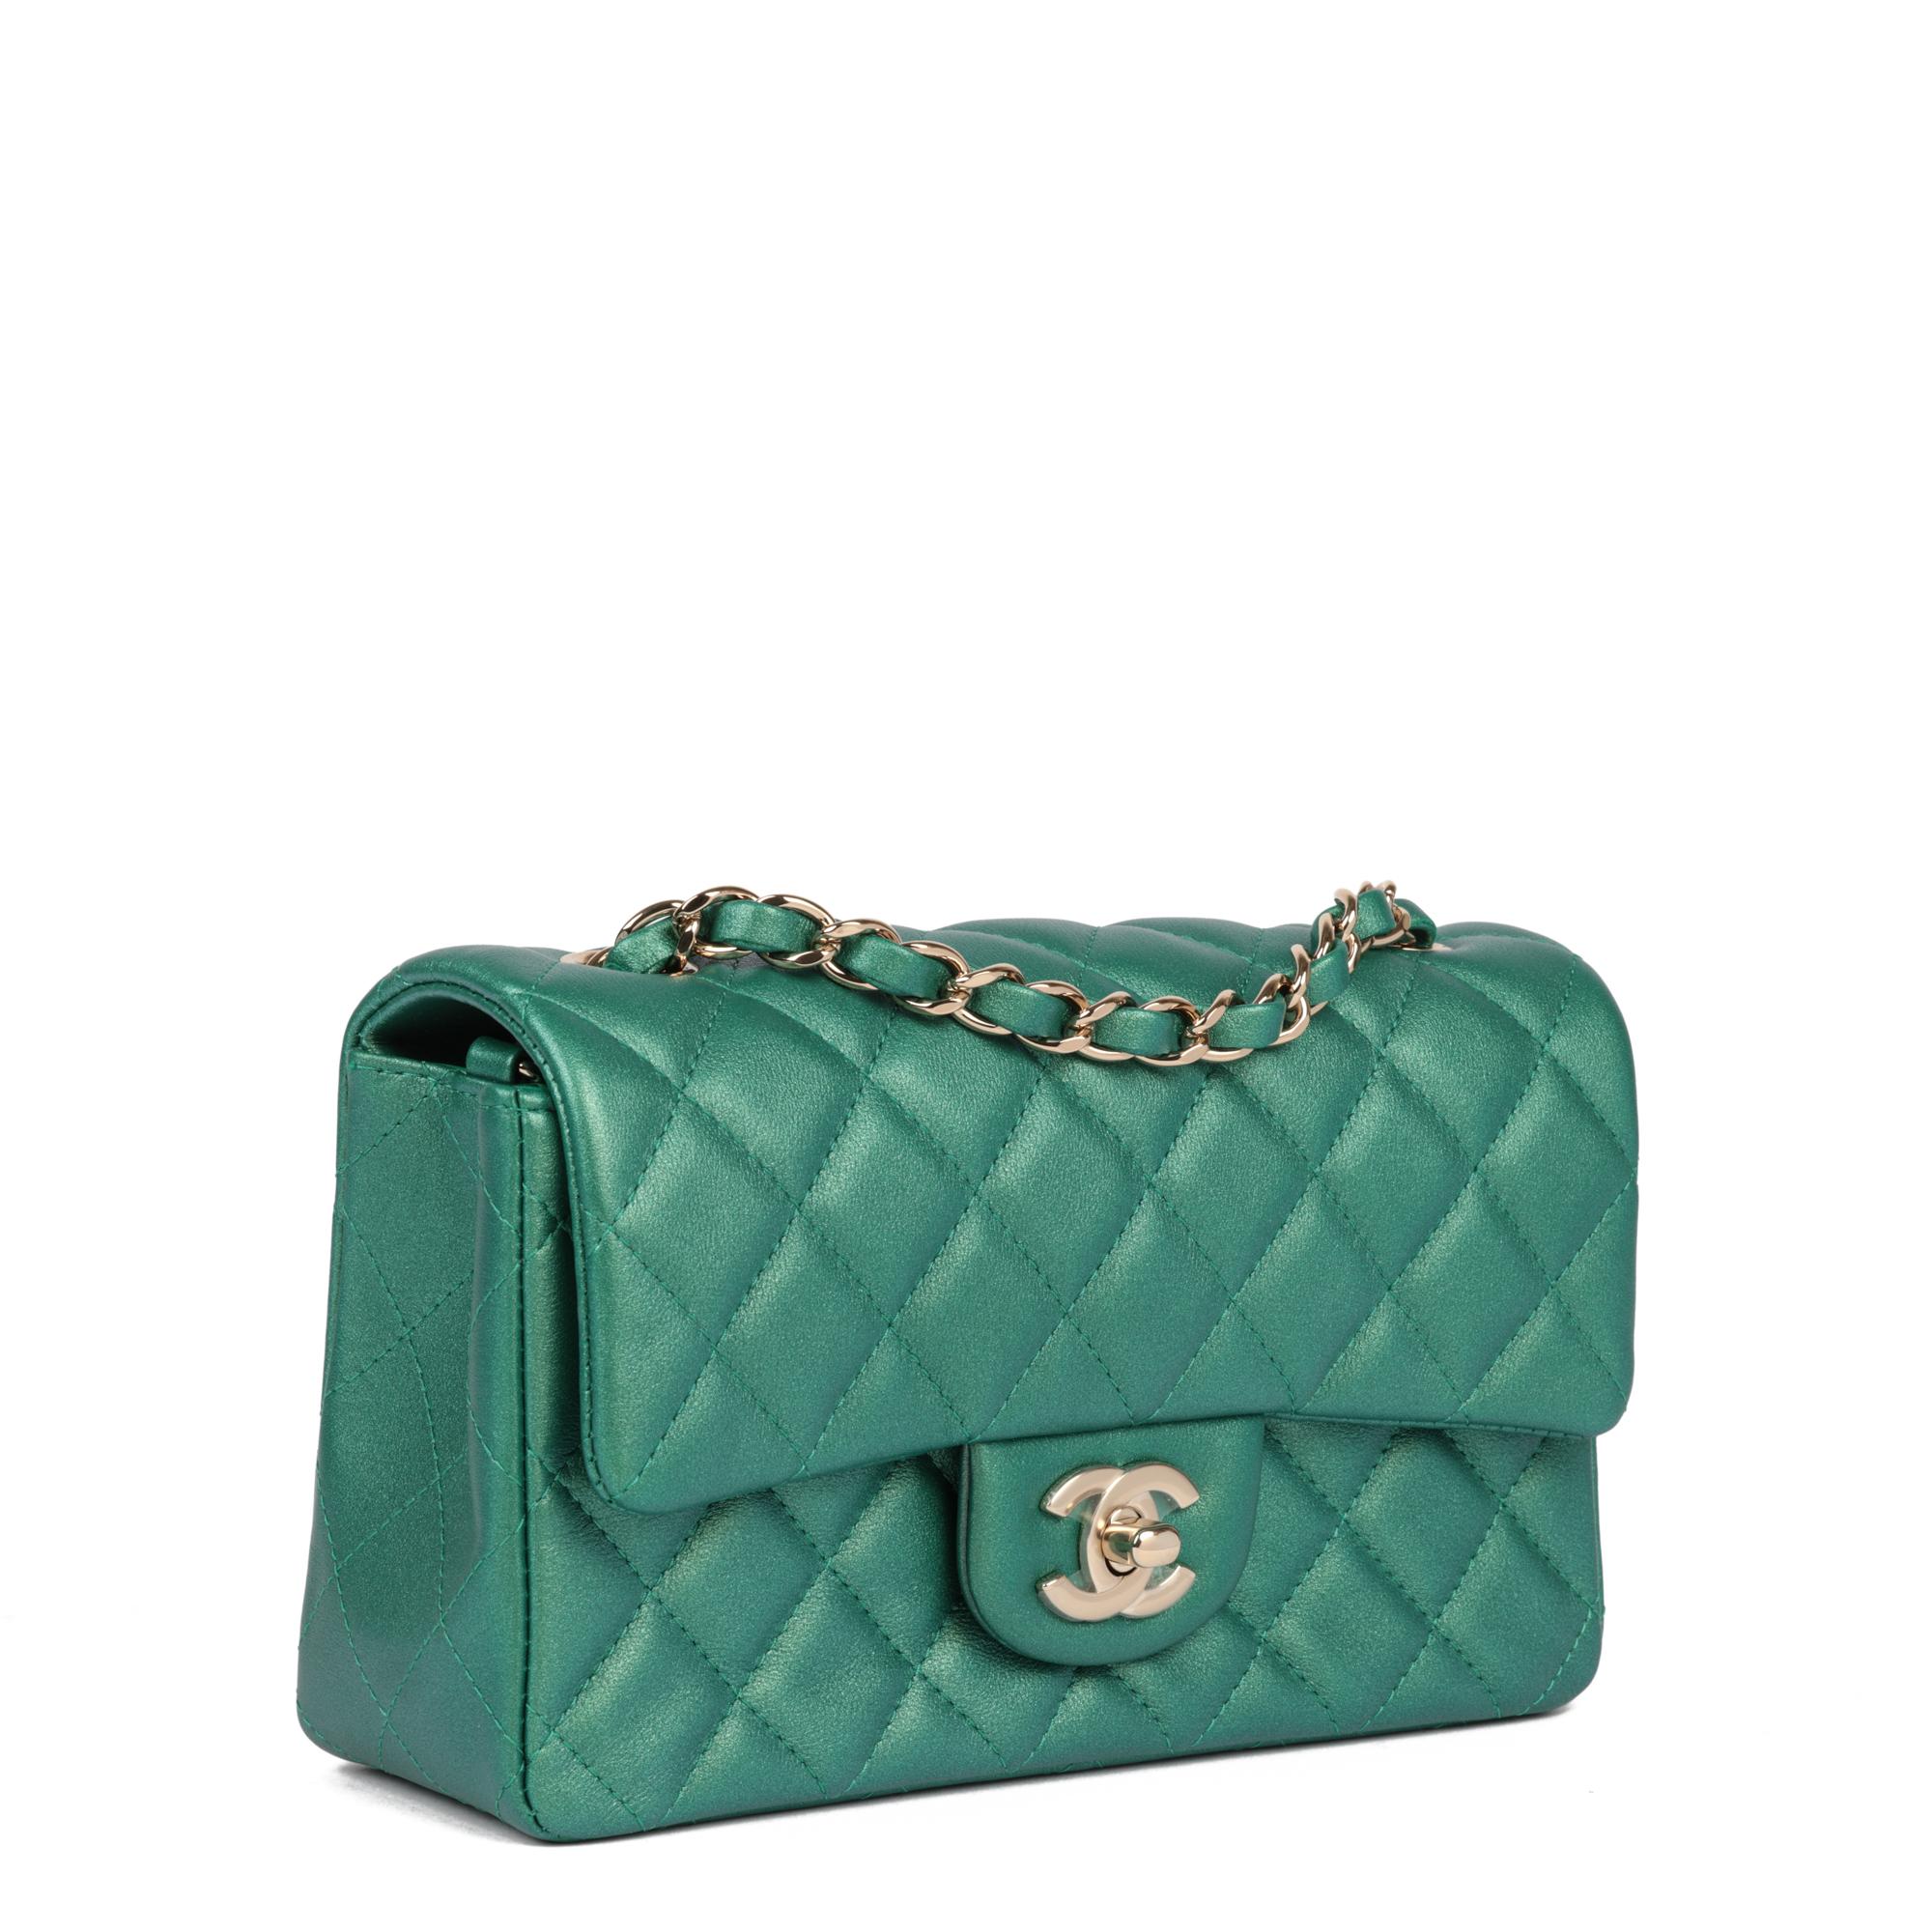 Chanel Green Iridescent Quilted Lambskin Rectangular Mini Flap Bag

CONDITION NOTES
This item is in unworn condition.

XUPES REFERENCE	CB905
BRAND	Chanel
MODEL	Rectangular Mini Flap Bag
AGE	2022
GENDER	Women's
MATERIAL(S)	Lambskin